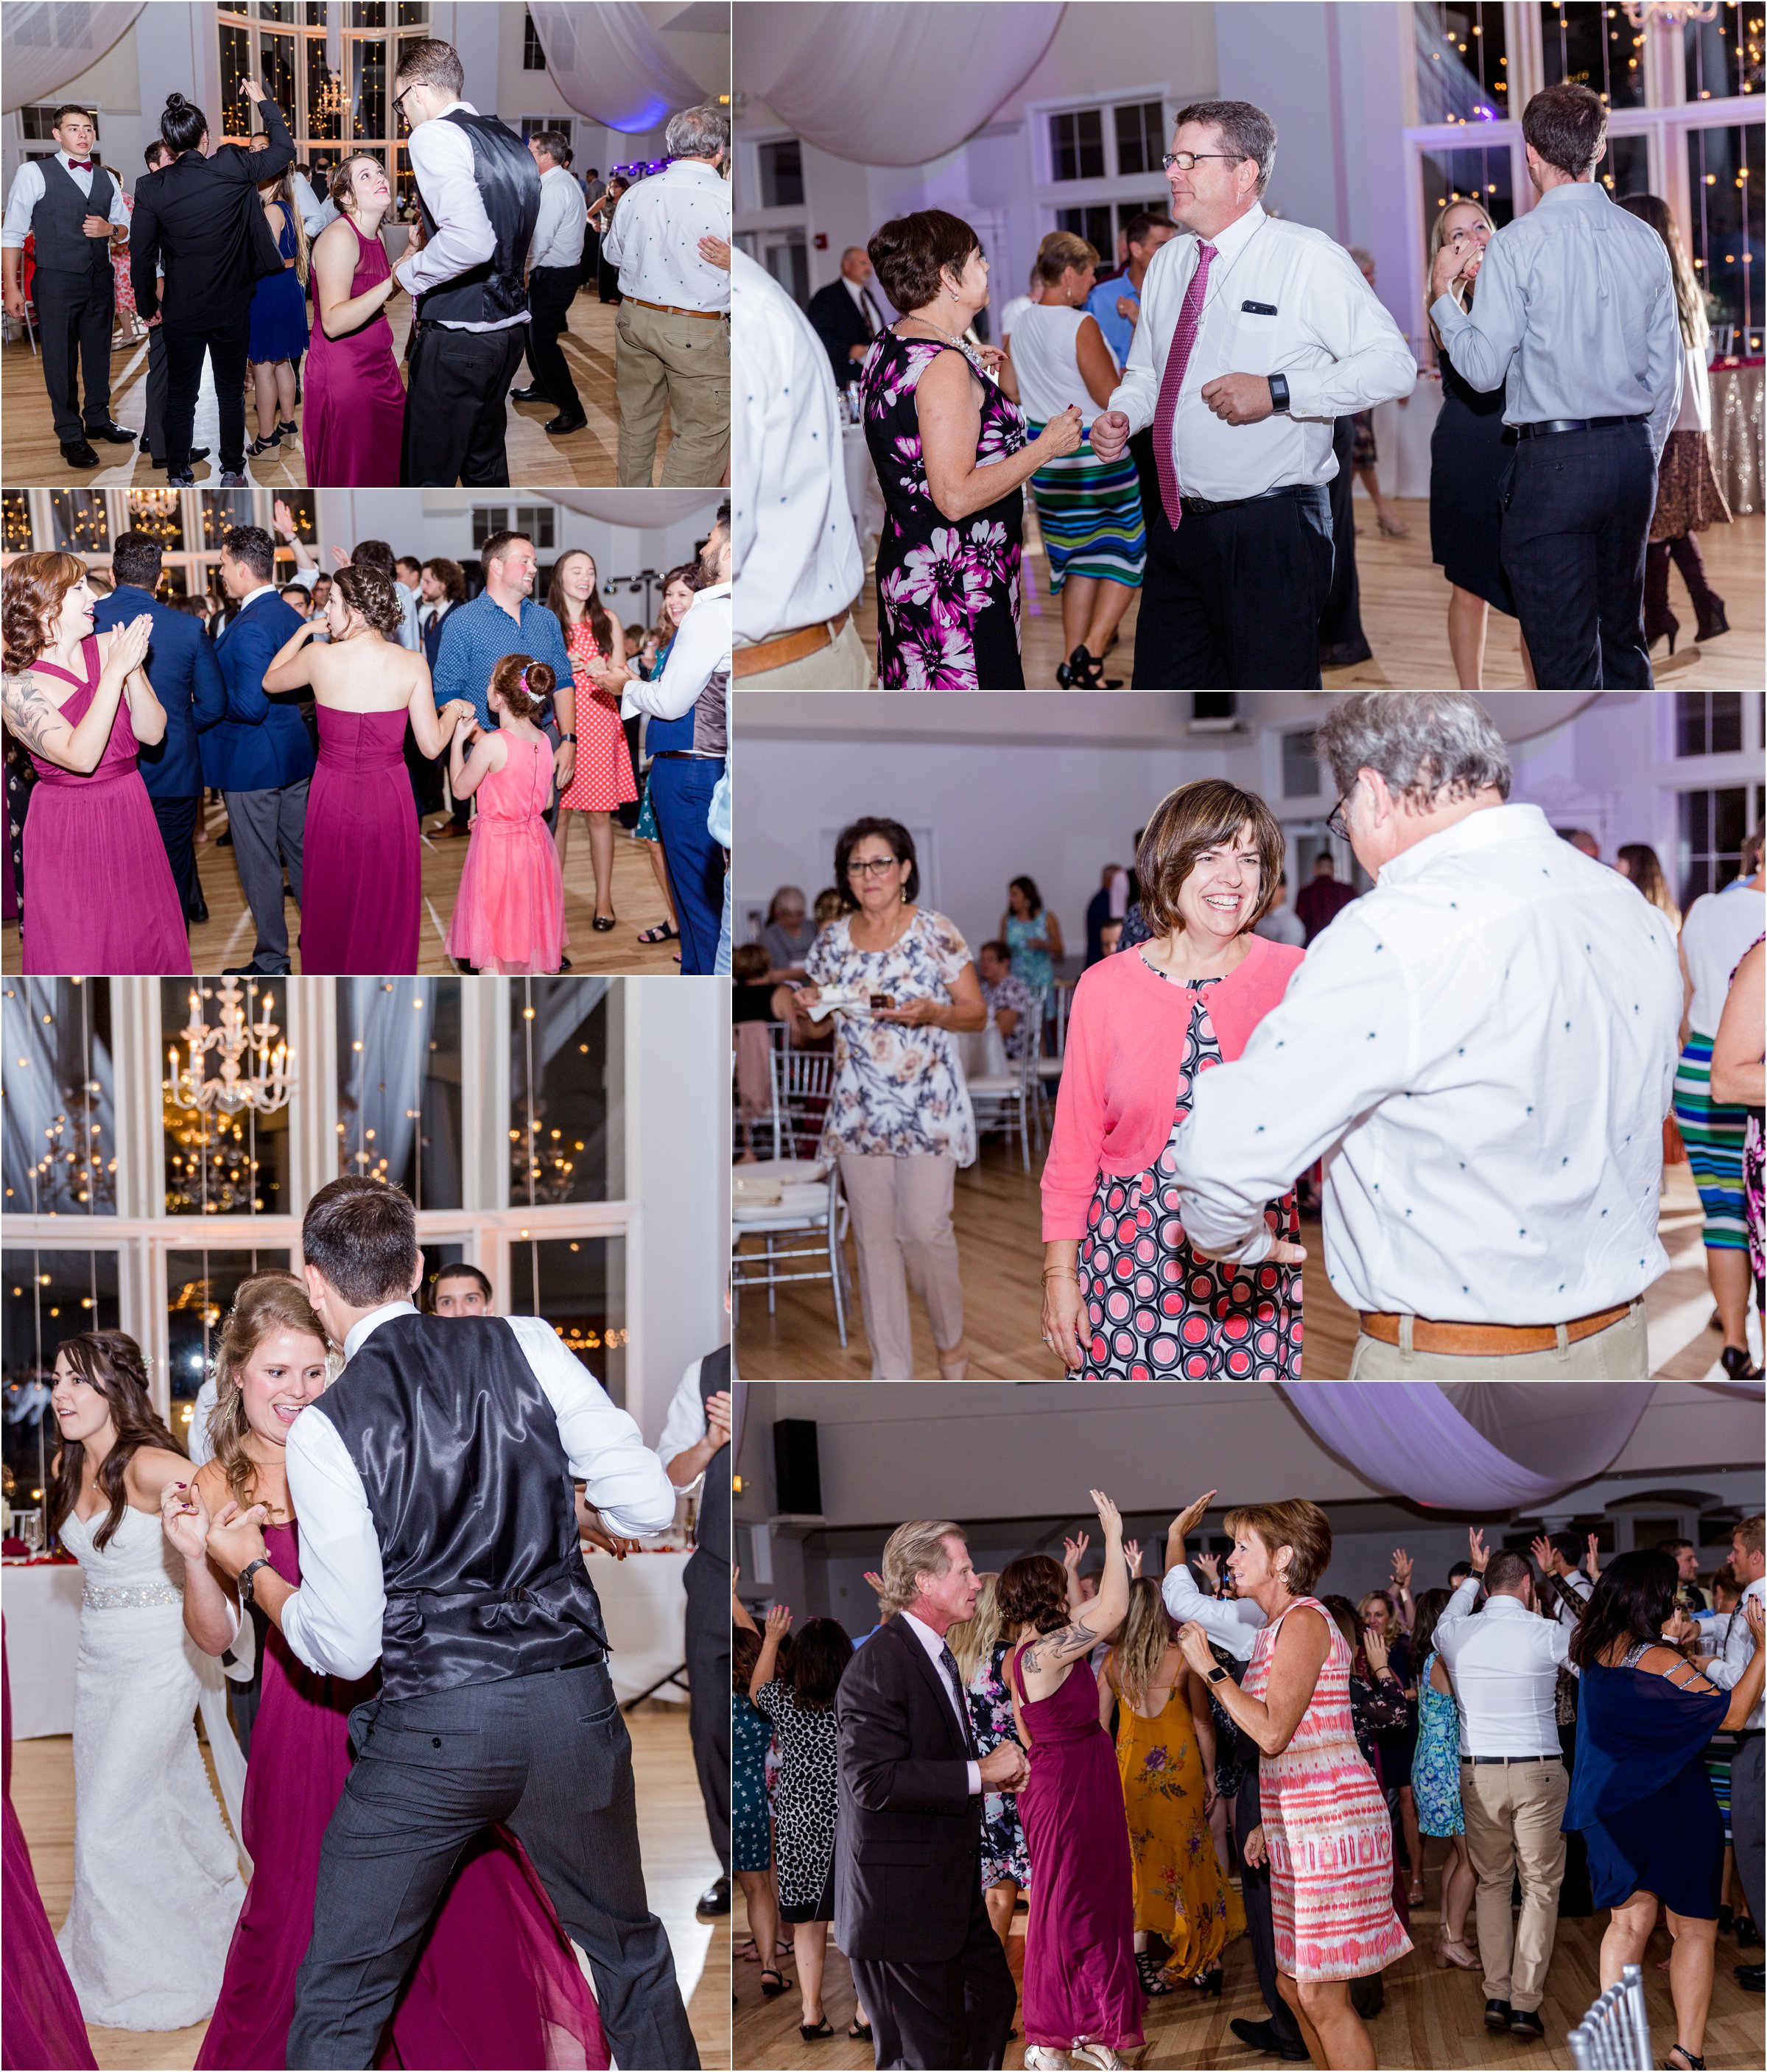 guests dance at wedding as bride and groom dance together